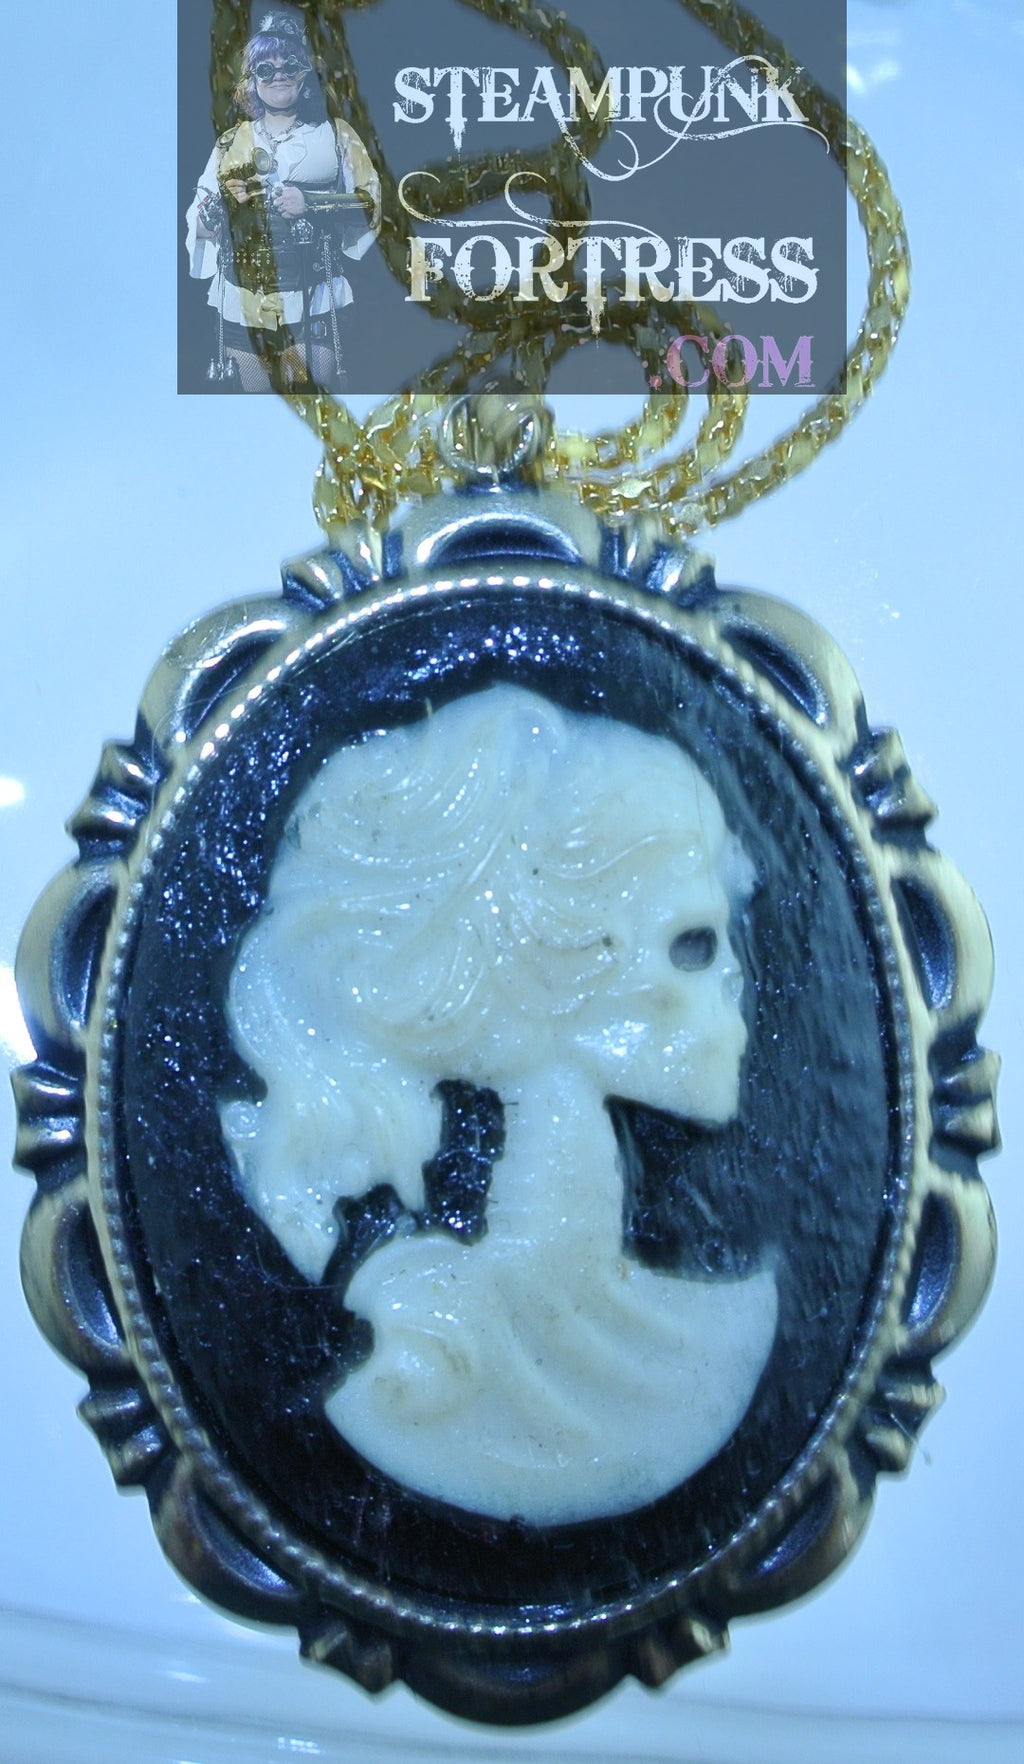 PIN BROOCH GLOW IN THE DARK GOLD CAMEO SKELETON LADY NECKLACE STARR WILDE STEAMPUNK FORTRESS HALLOWEEN COSPLAY COSTUME